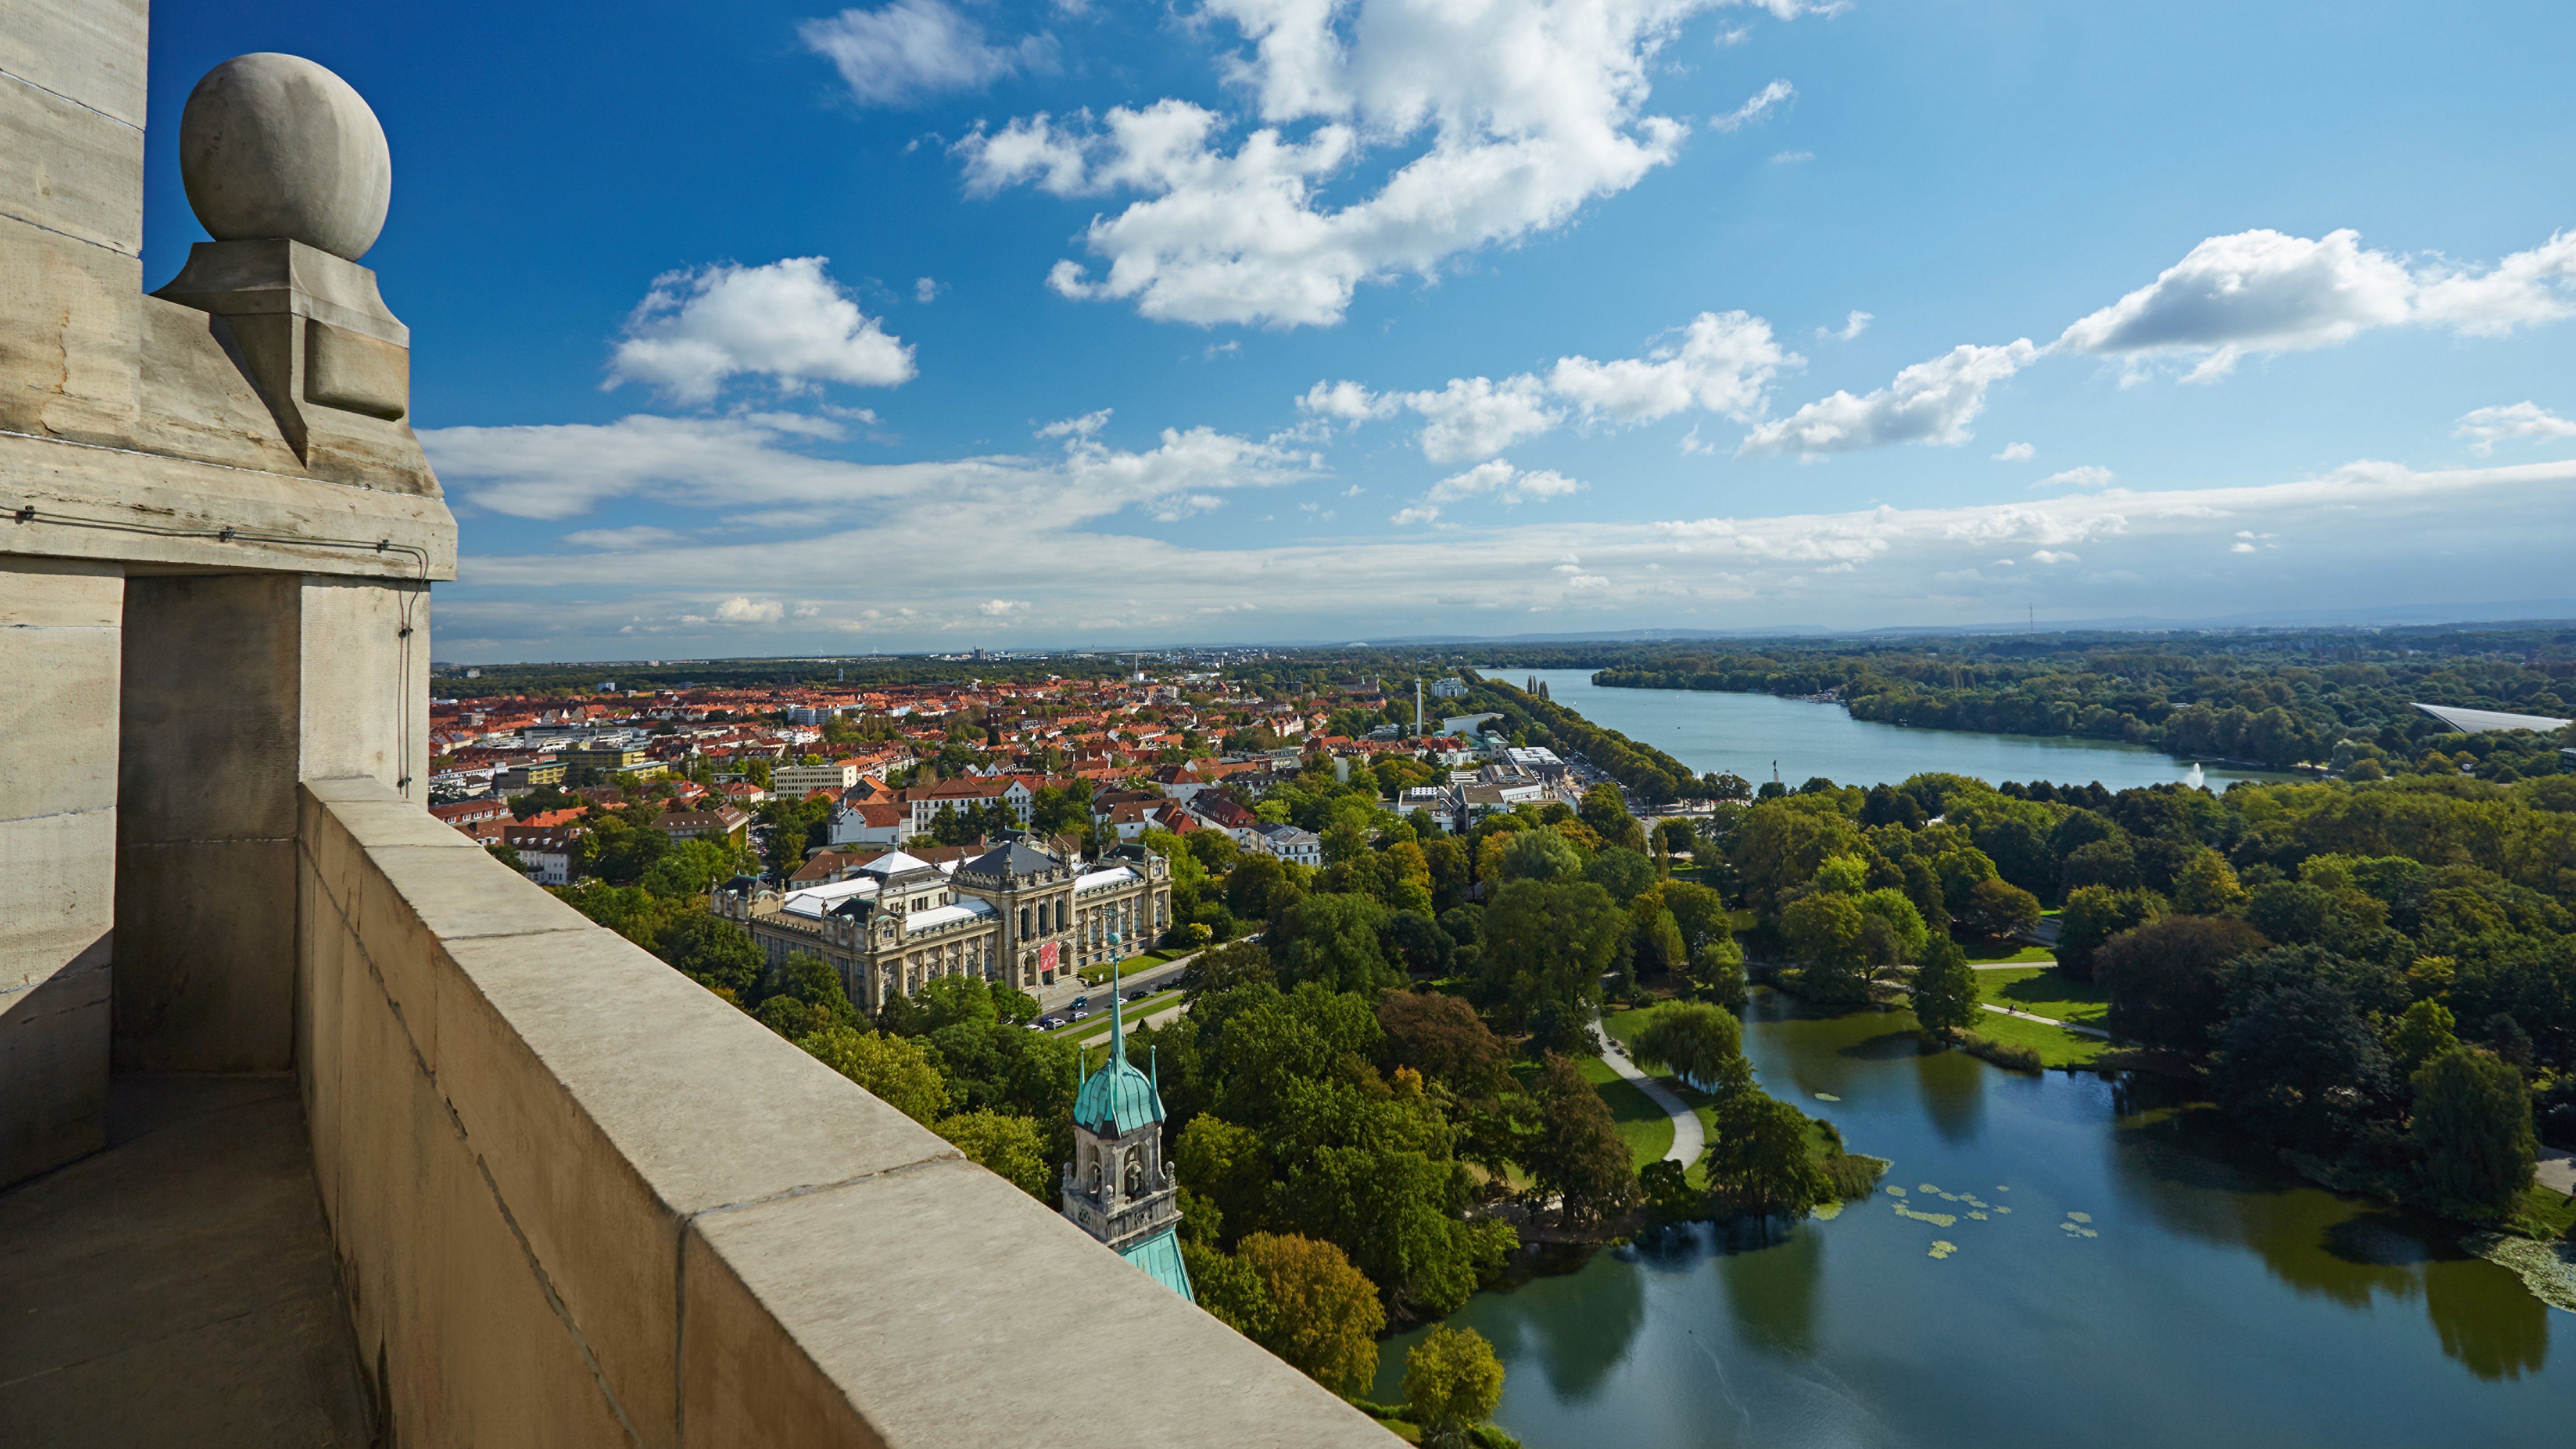 View from the town hall dome on Maschsee and Südstadt in Hanover.